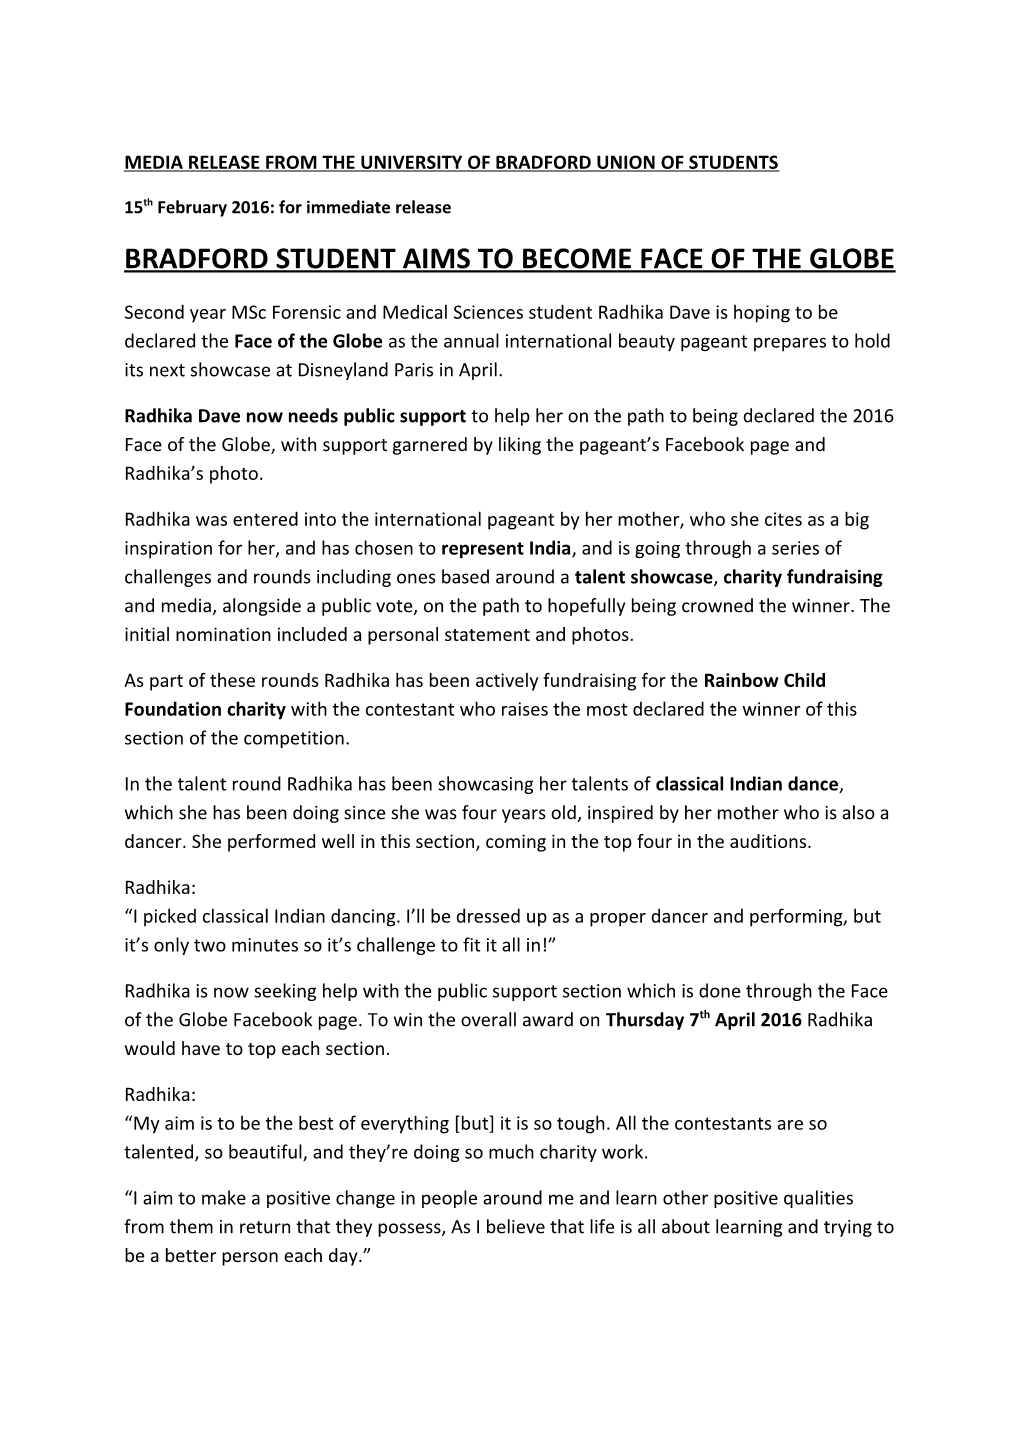 Media Release from the University of Bradford Union of Students